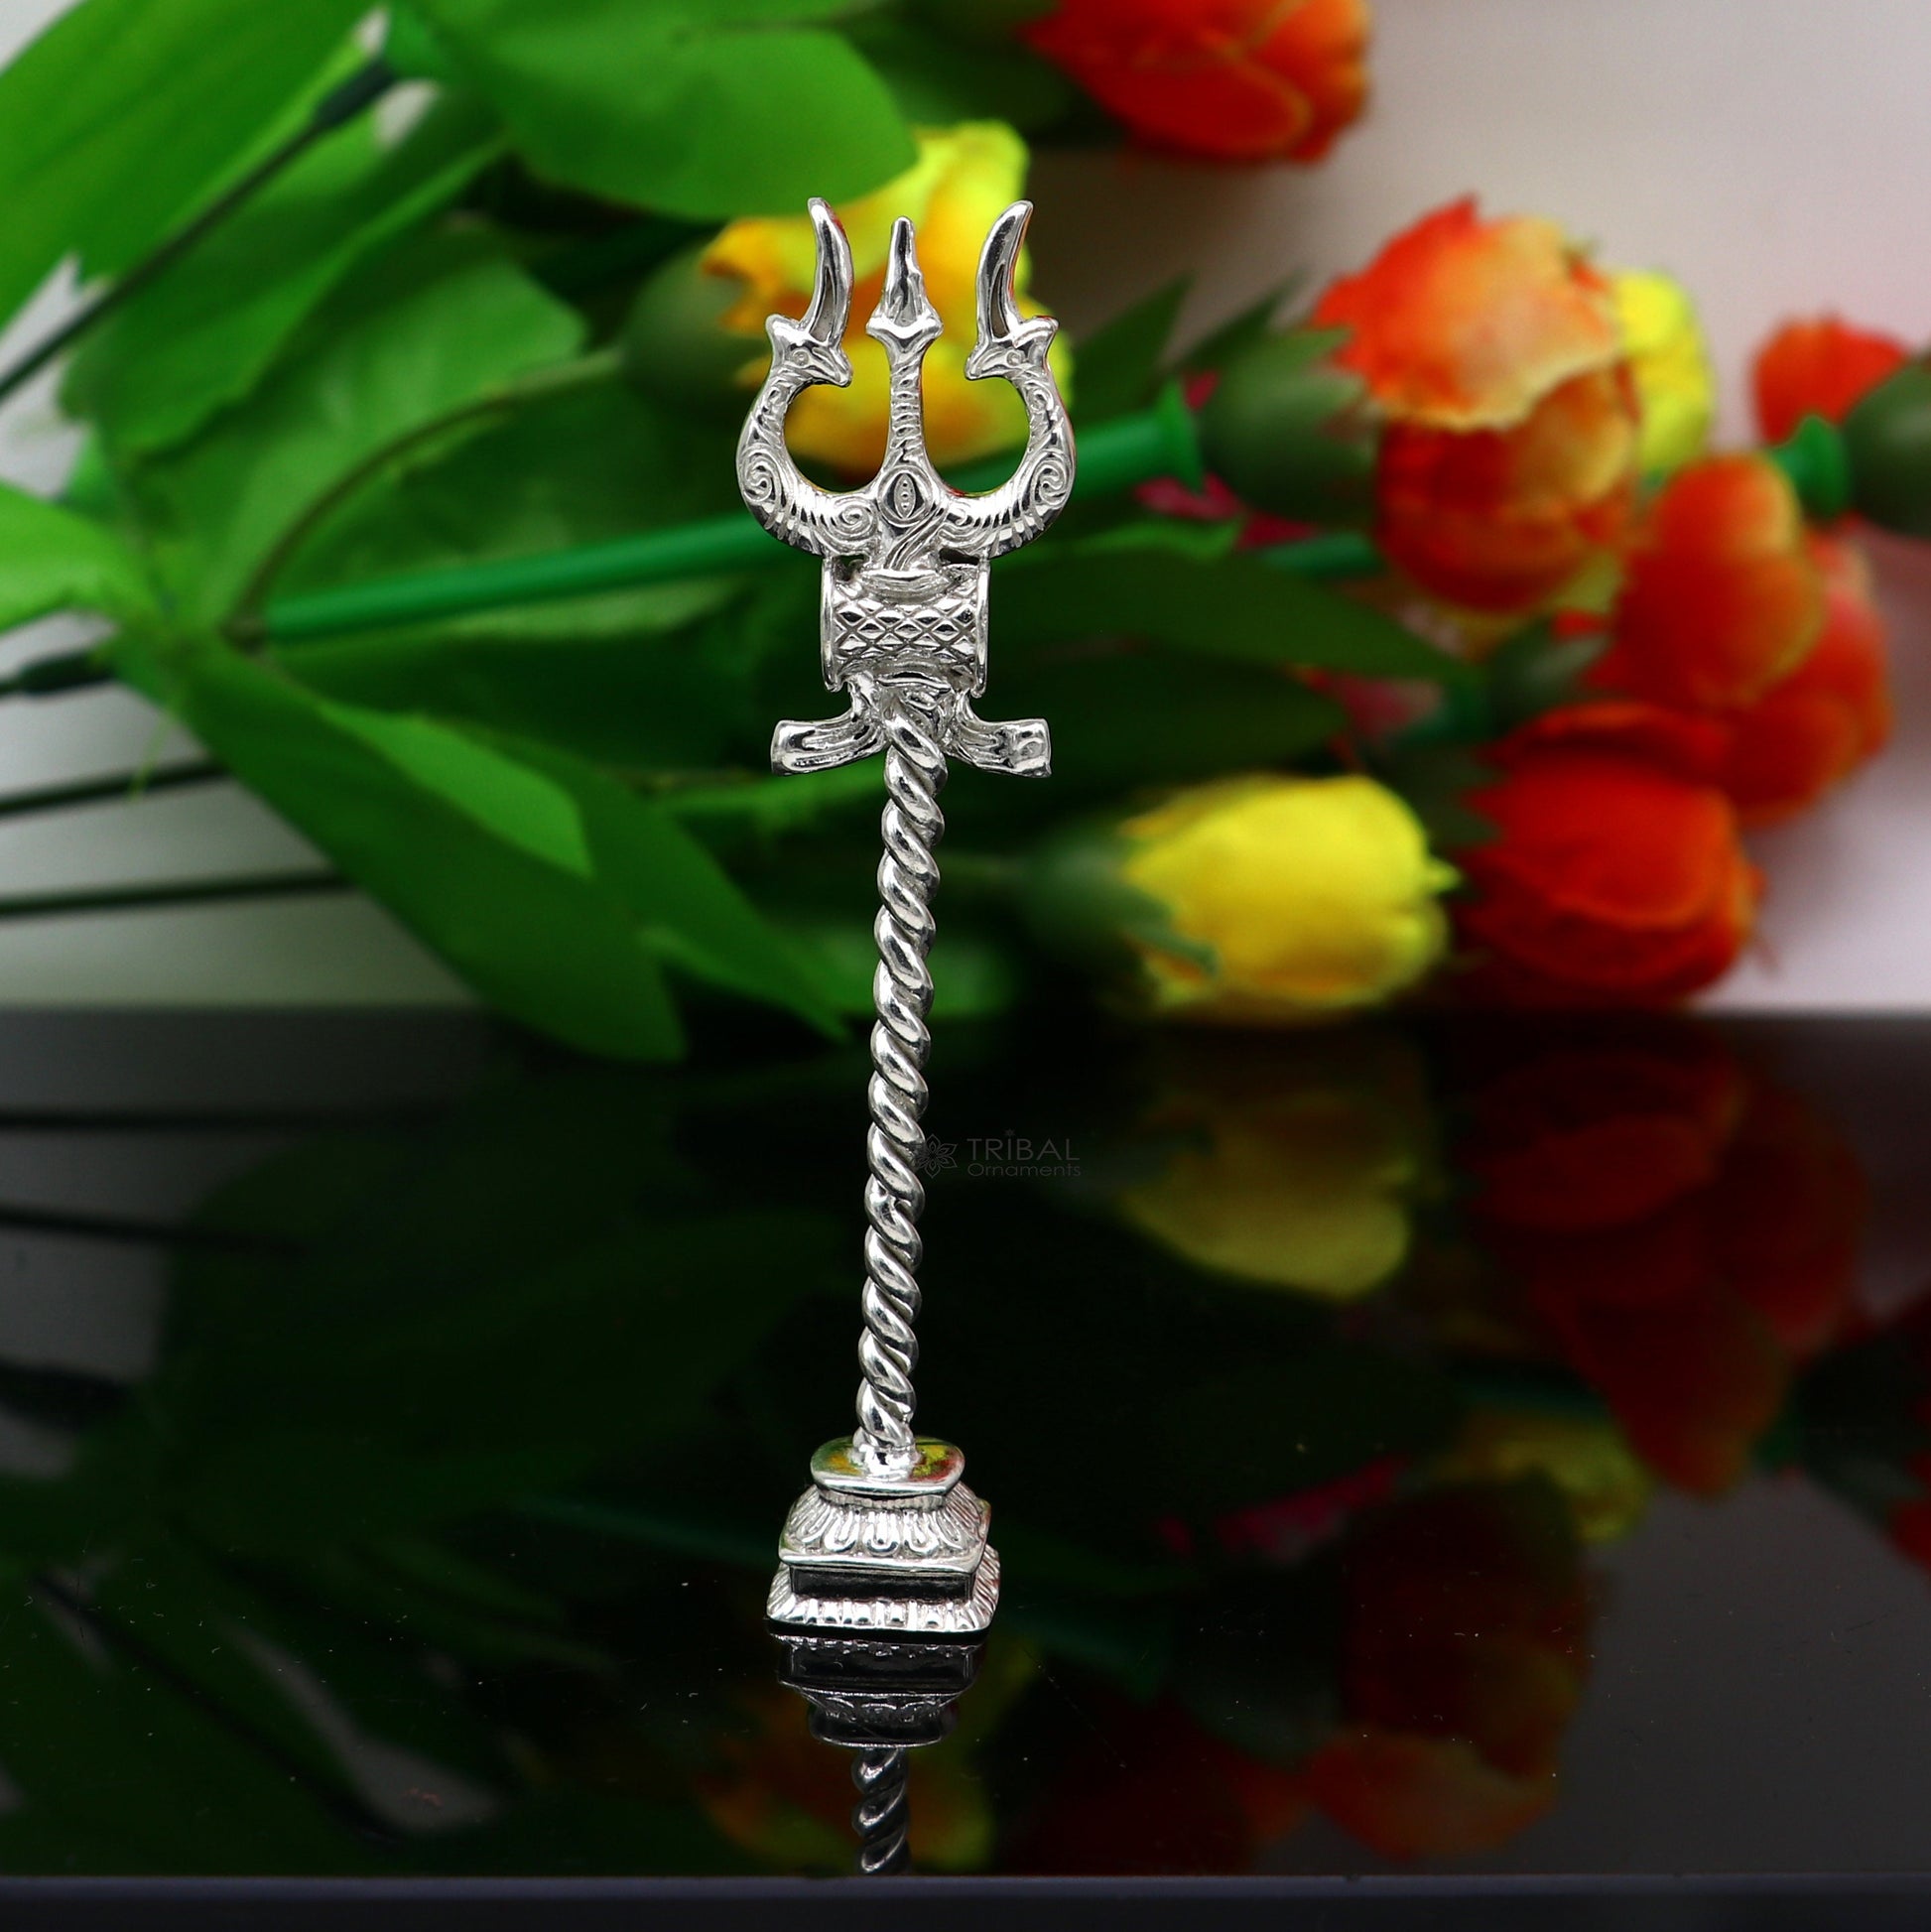 925 Sterling silver handmade lord Shiva trident with Damaru, fabulous craftsmanship Mahadev trishul, best collectible puja article art641 - TRIBAL ORNAMENTS